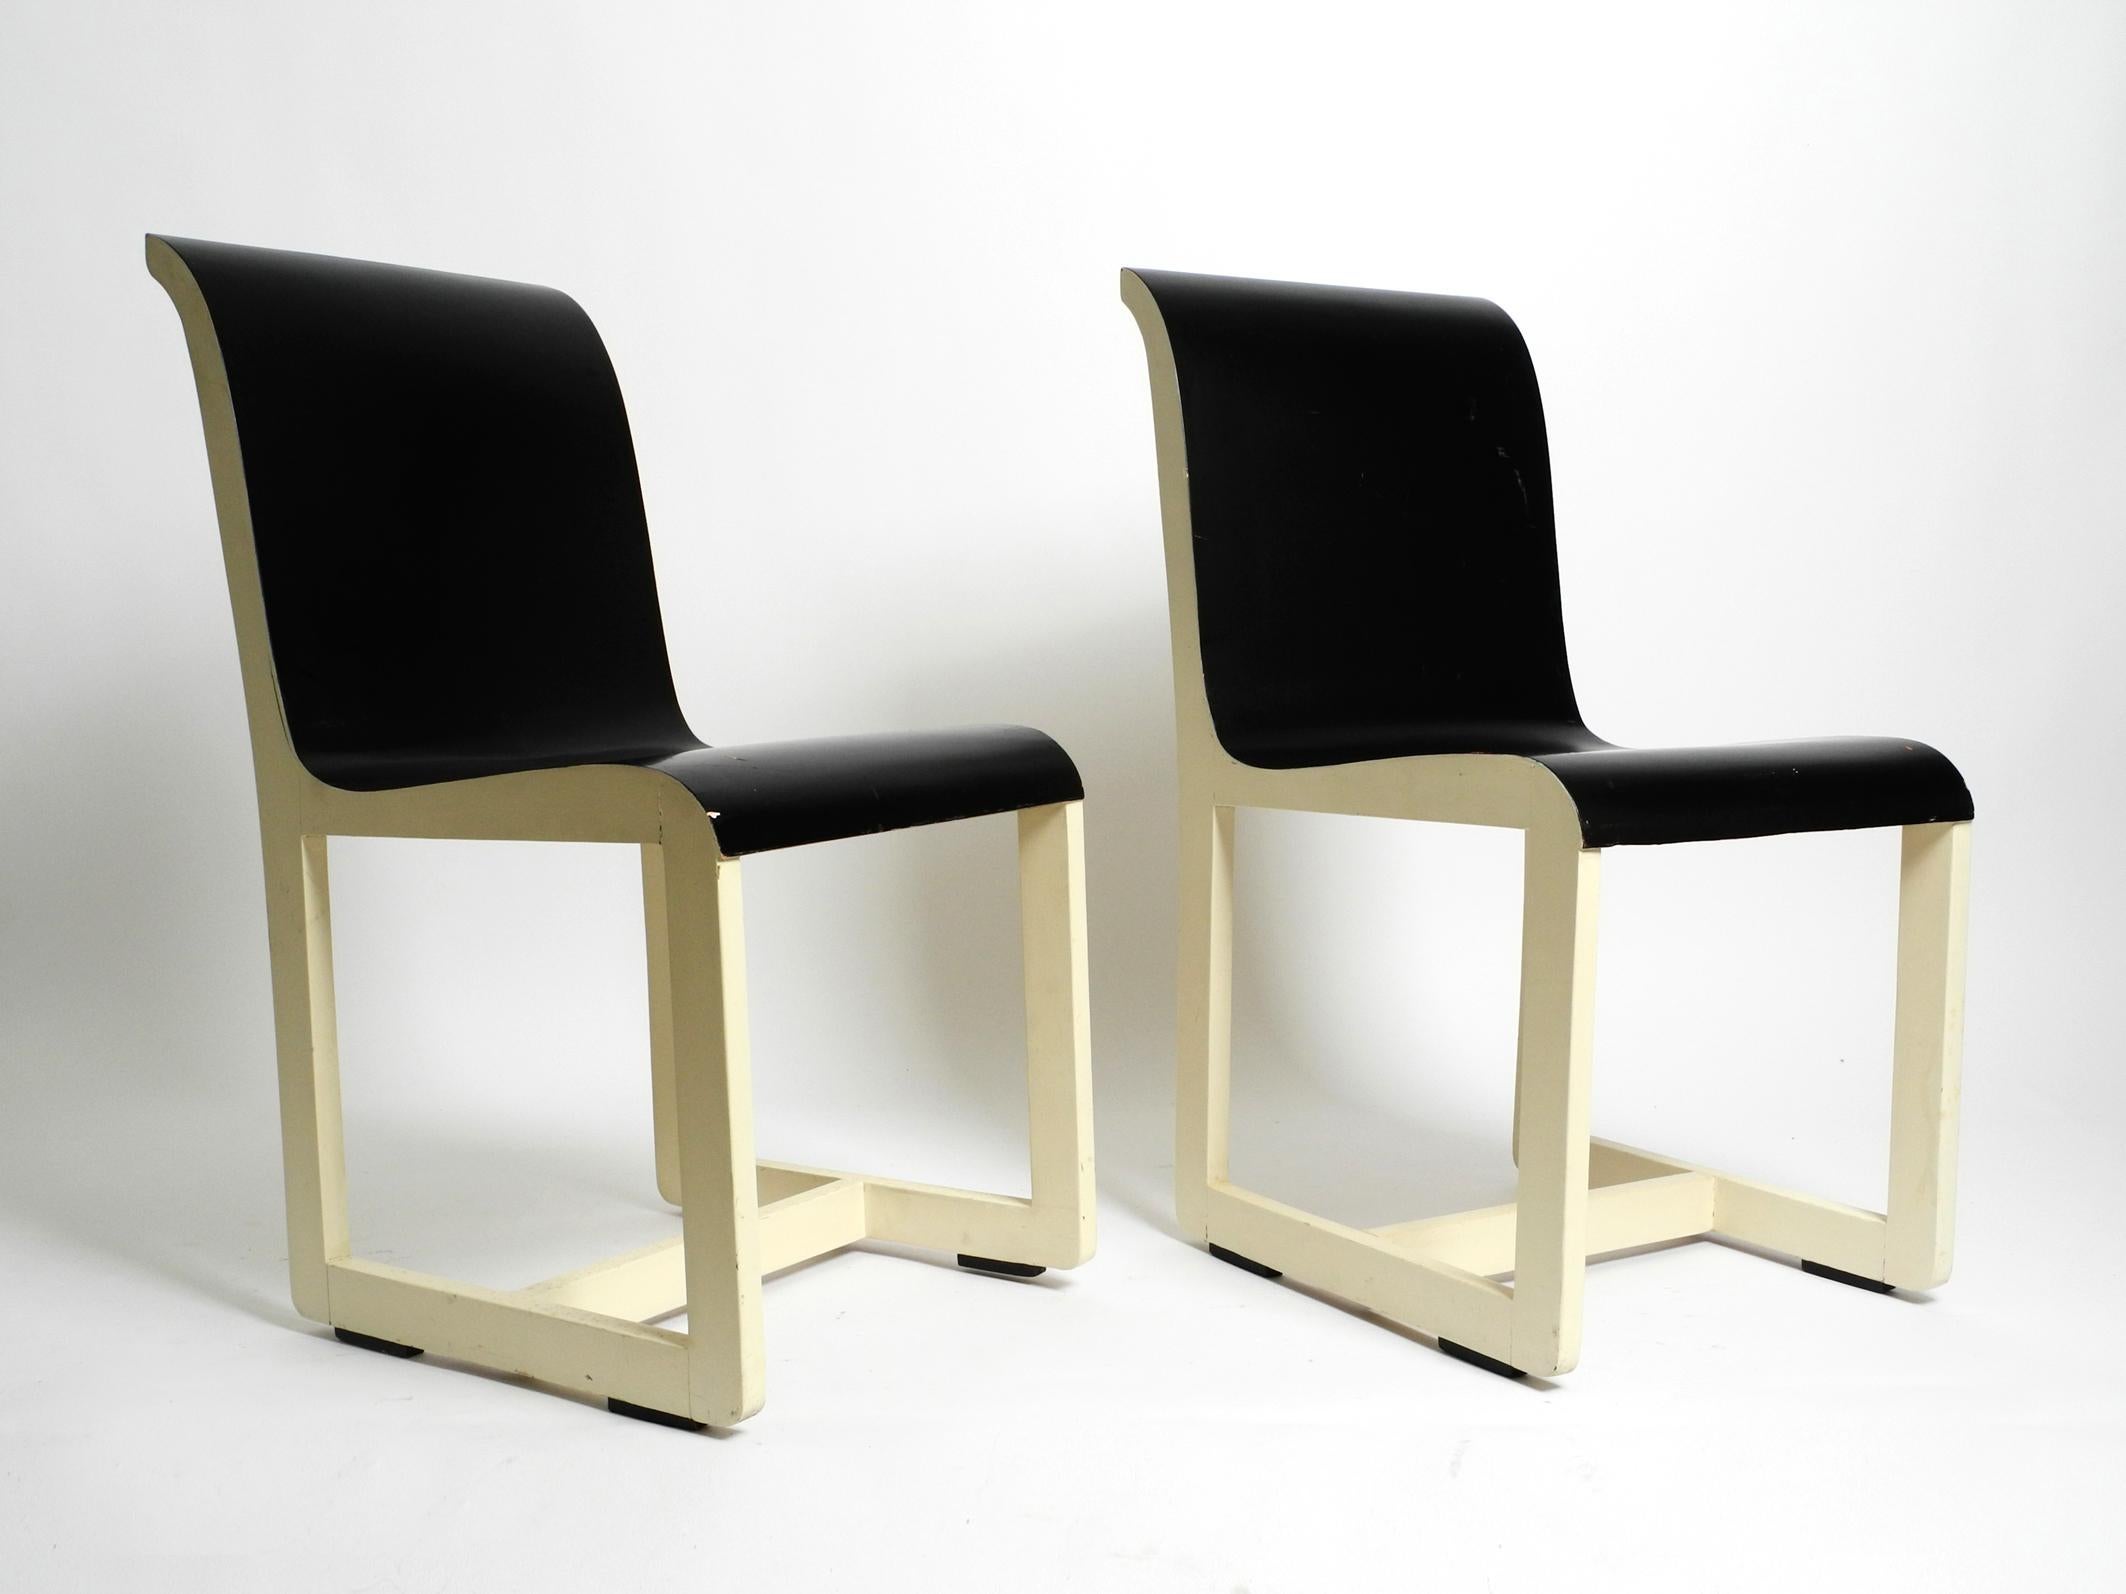 Two original 1930s wooden chairs by the well-known Bauhaus student Peter Keler For Sale 5